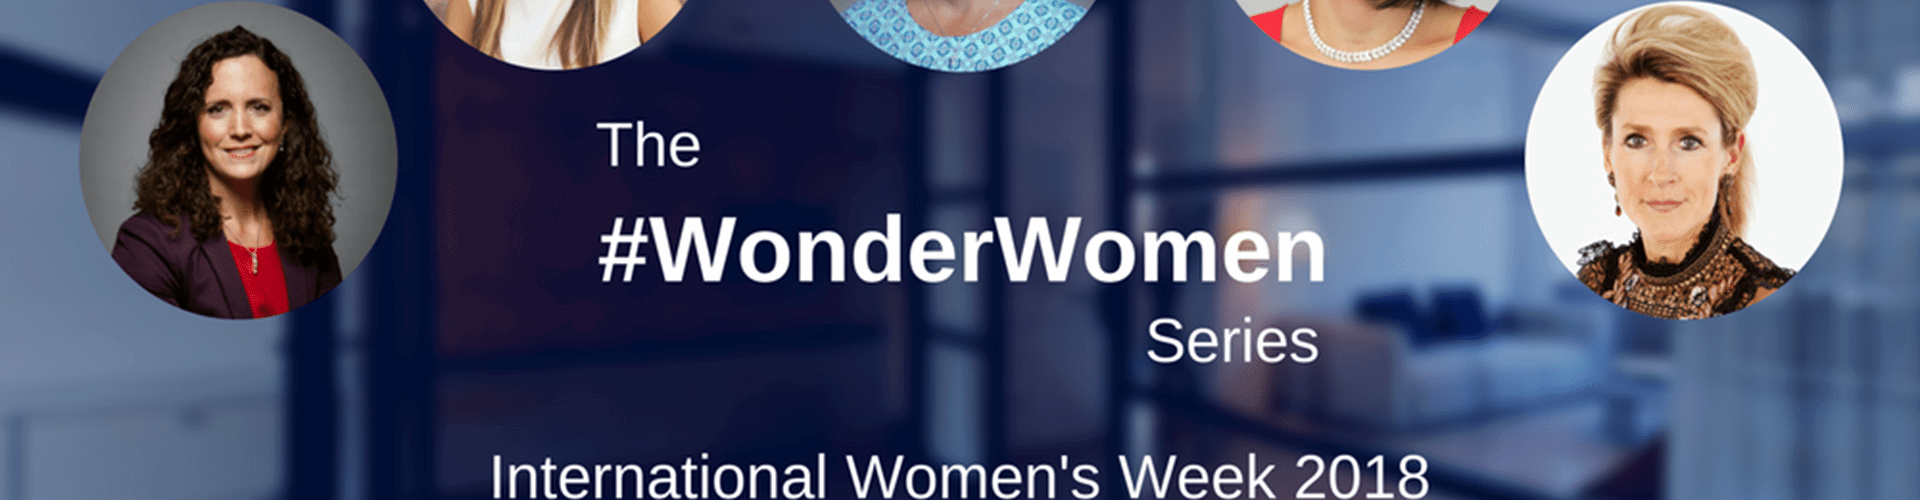 The #WonderWomen Series: Celebrating the changing face of leadership in business